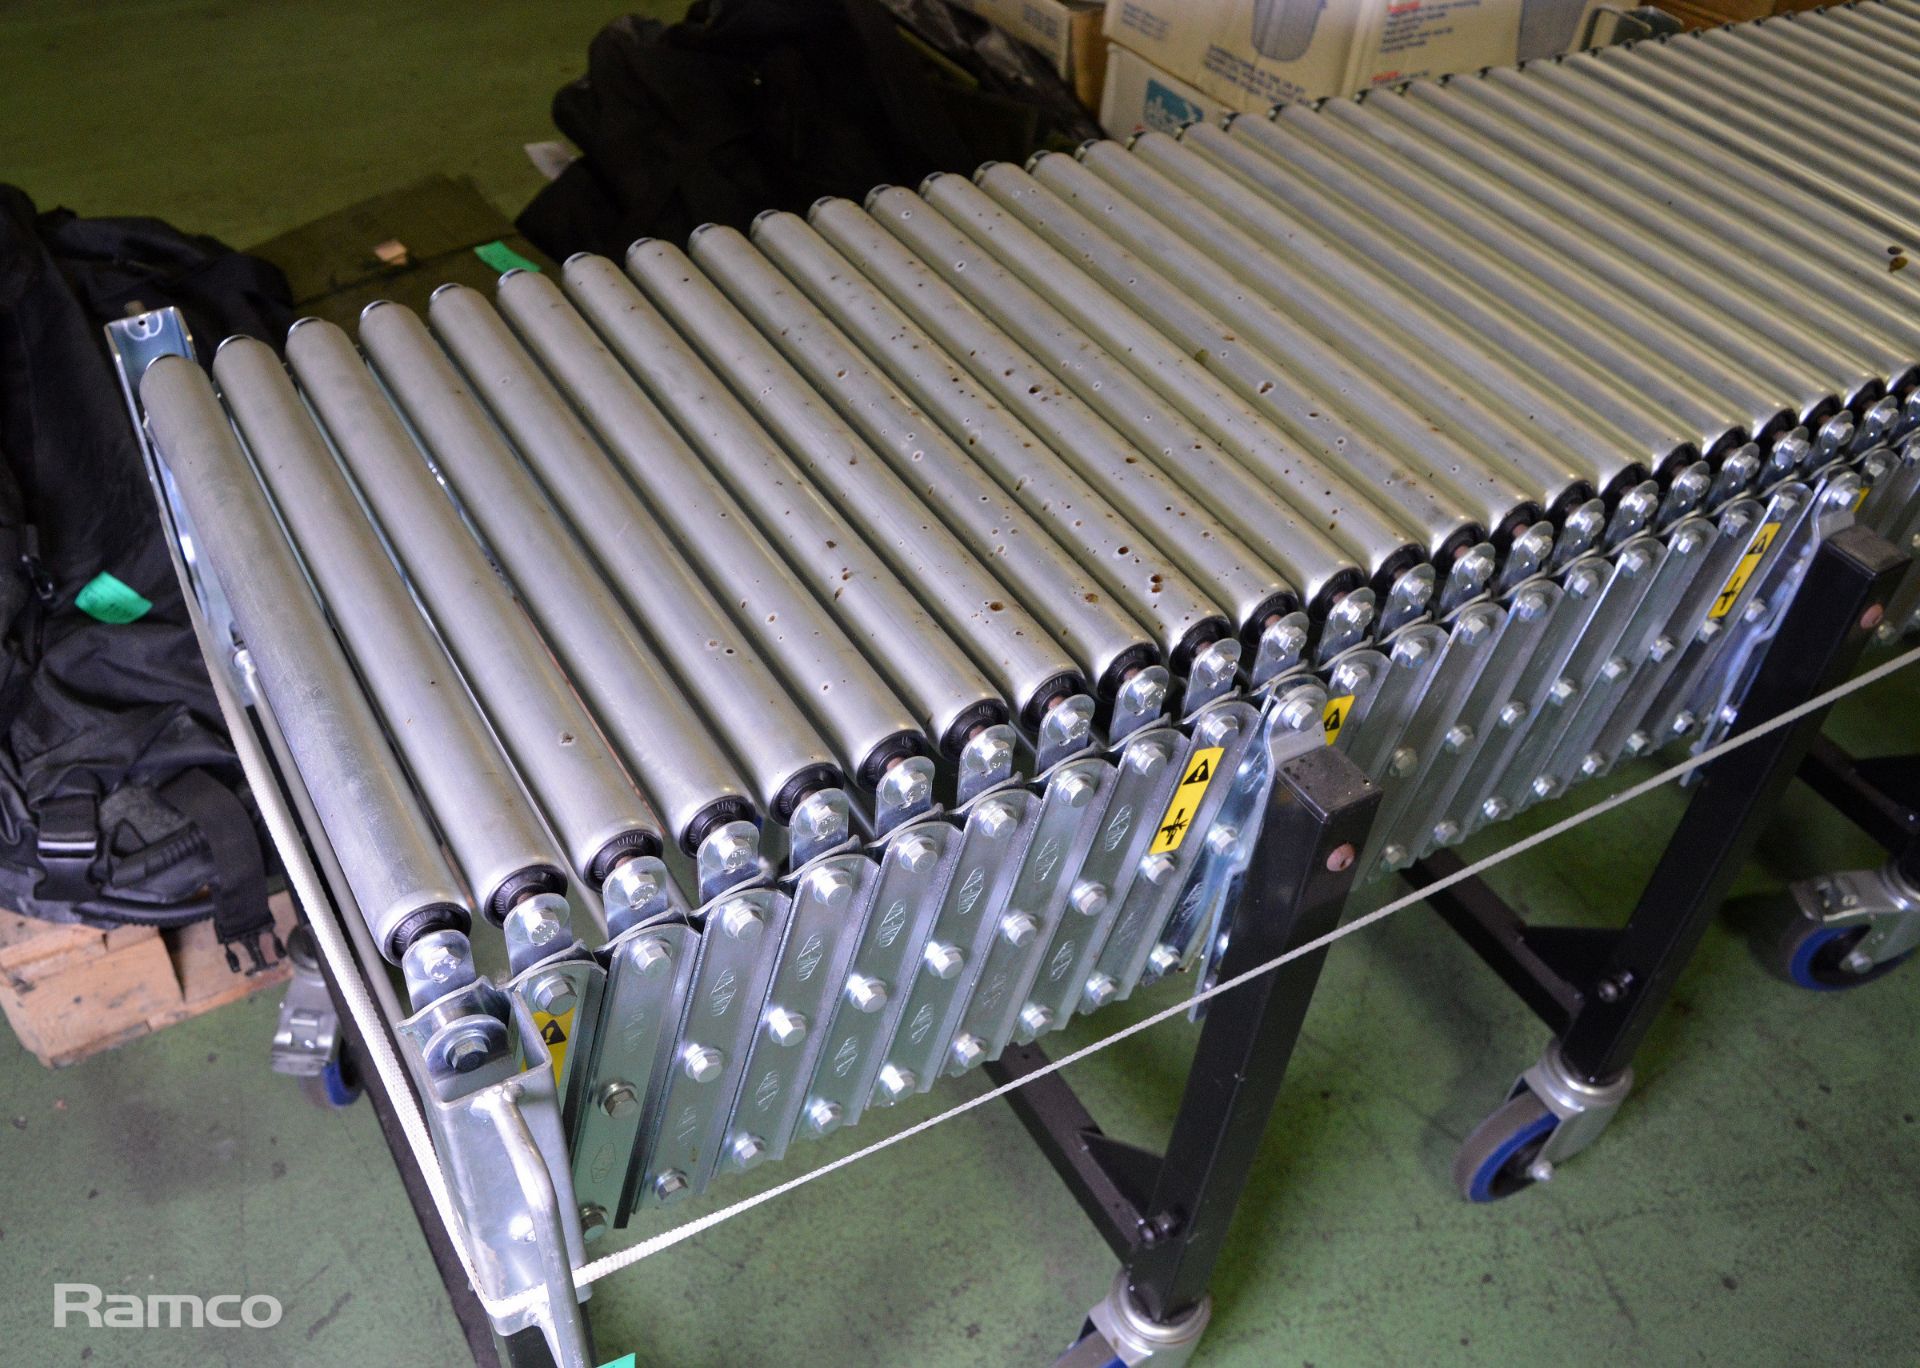 Flexible Steel Roller Conveyor System Max - L 6100mm (extended) x W 700mm x H 750mm - Image 2 of 3